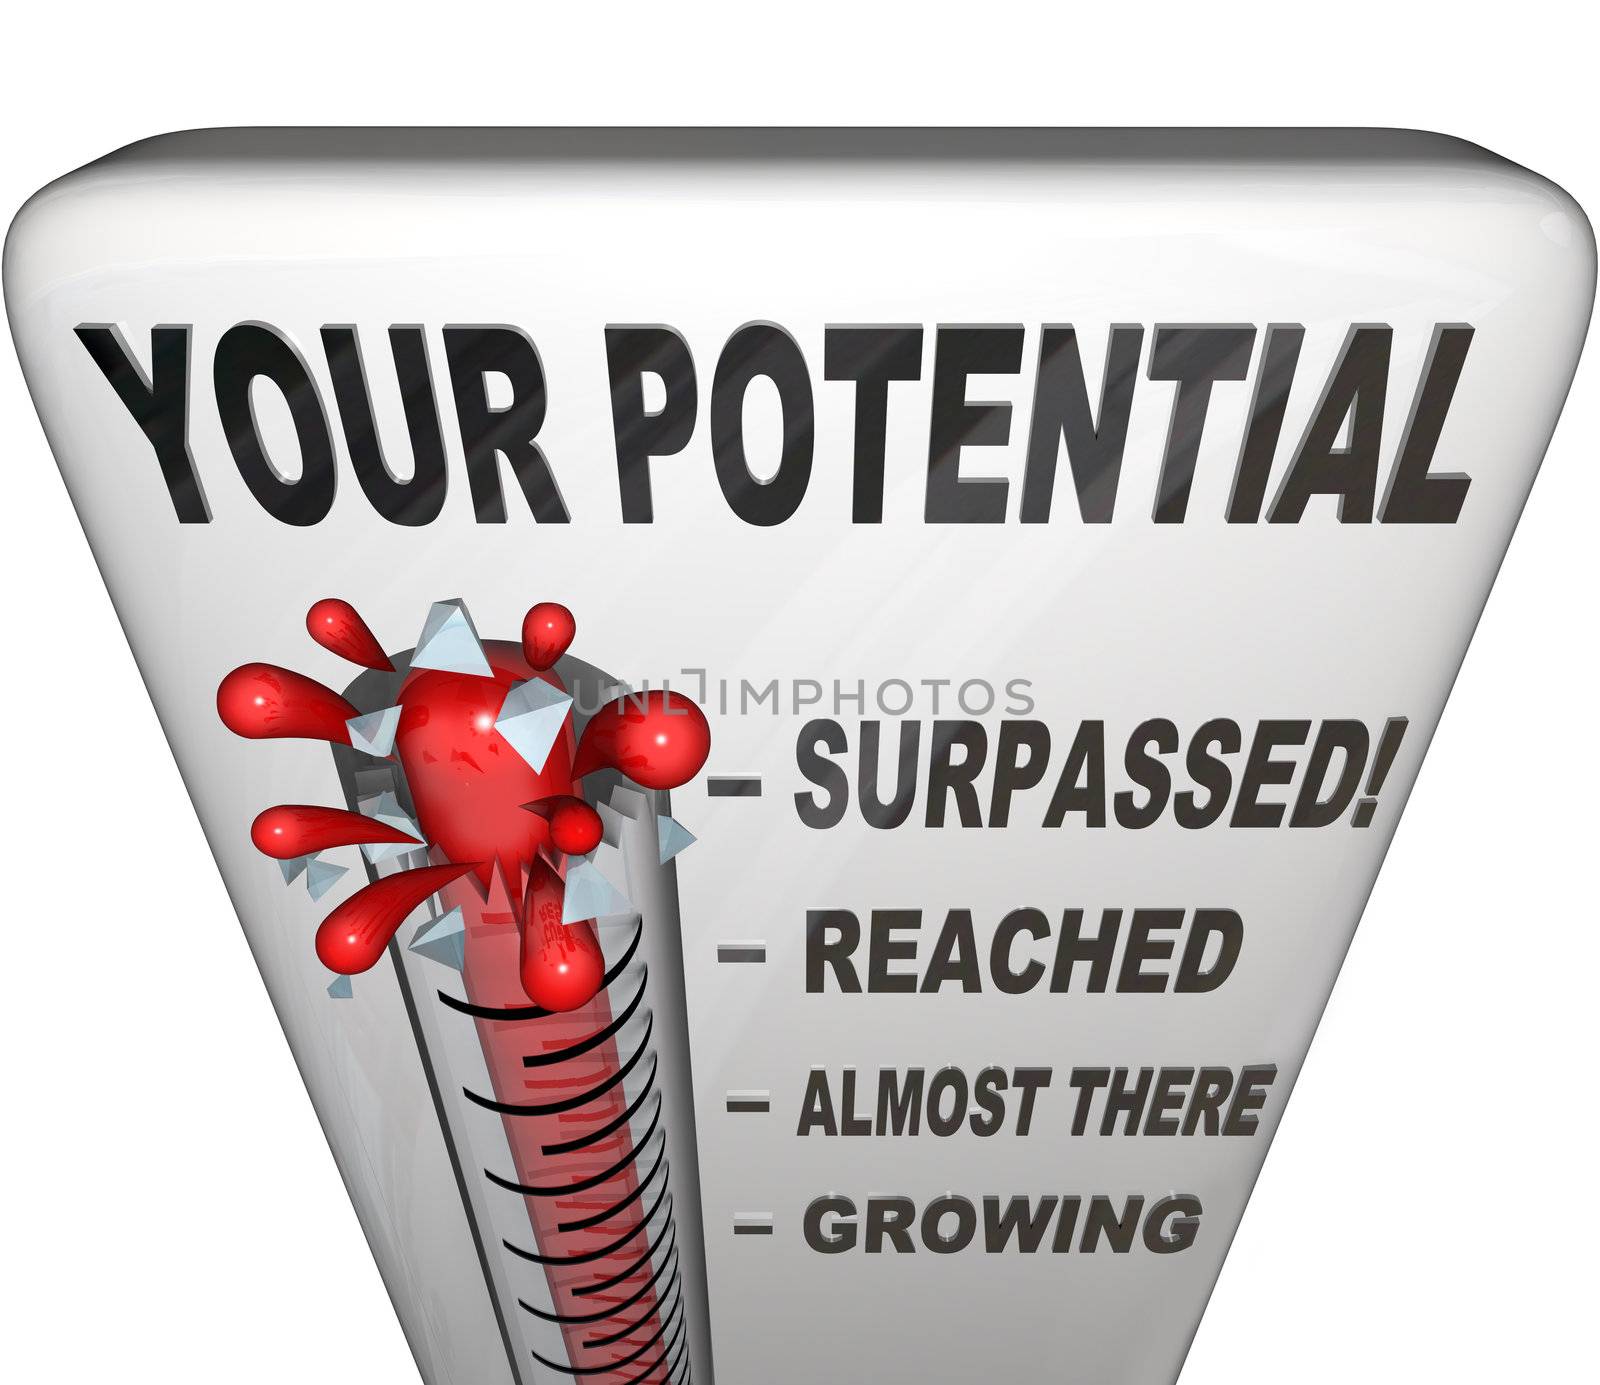 A thermometer measuring your level of potential reached, ranging from Growing, Almost There, Reached and Surpassed to show how successful your personal growth efforts have been